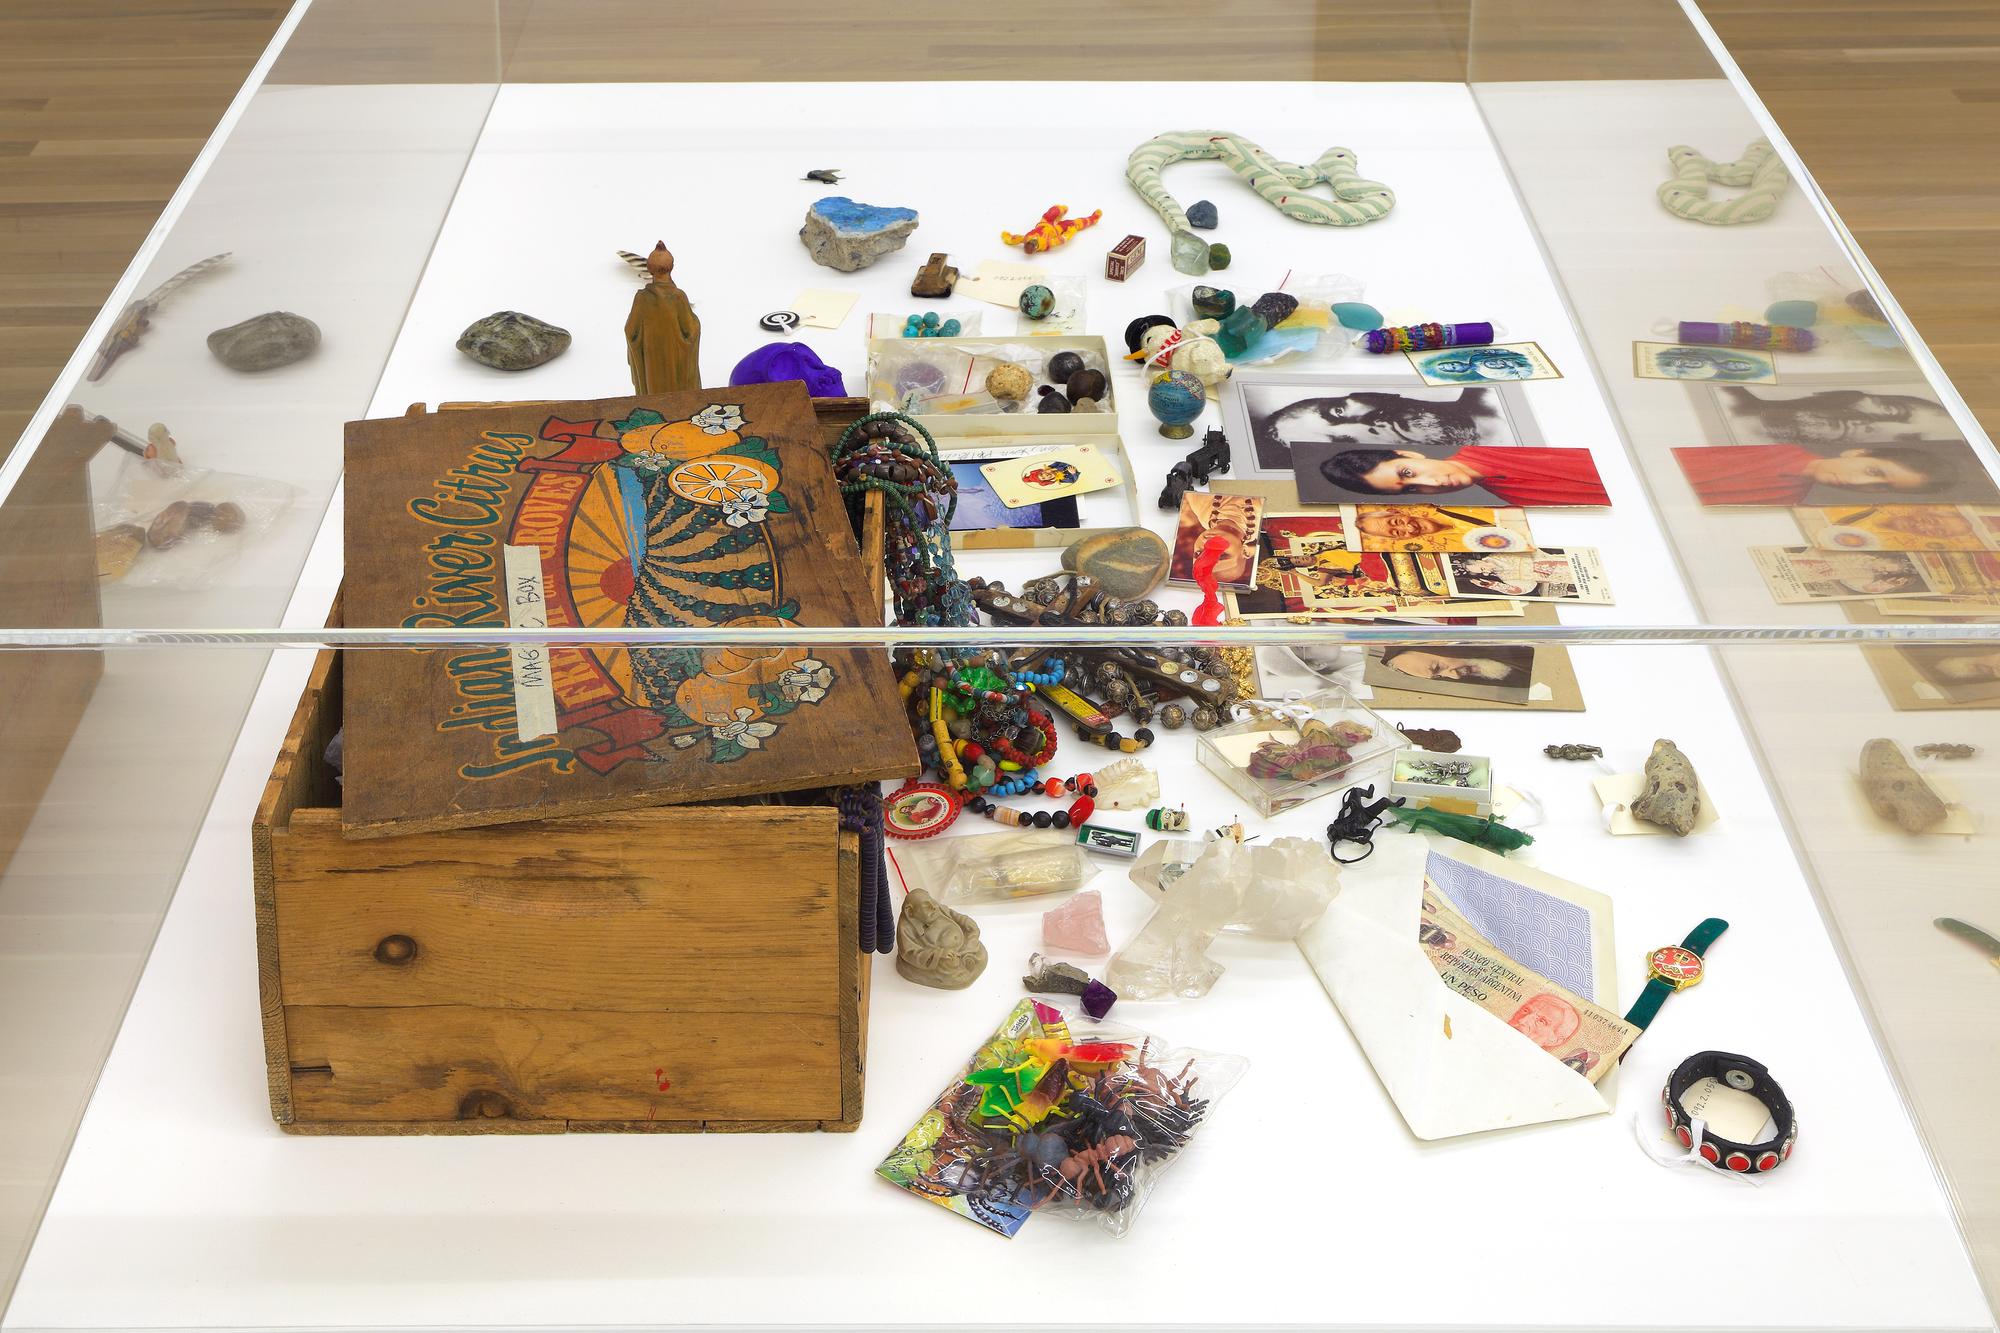 A wooden box resting in a glass case, surrounded by colorful knickknacks: watches, photographs, jewelry, and the like.